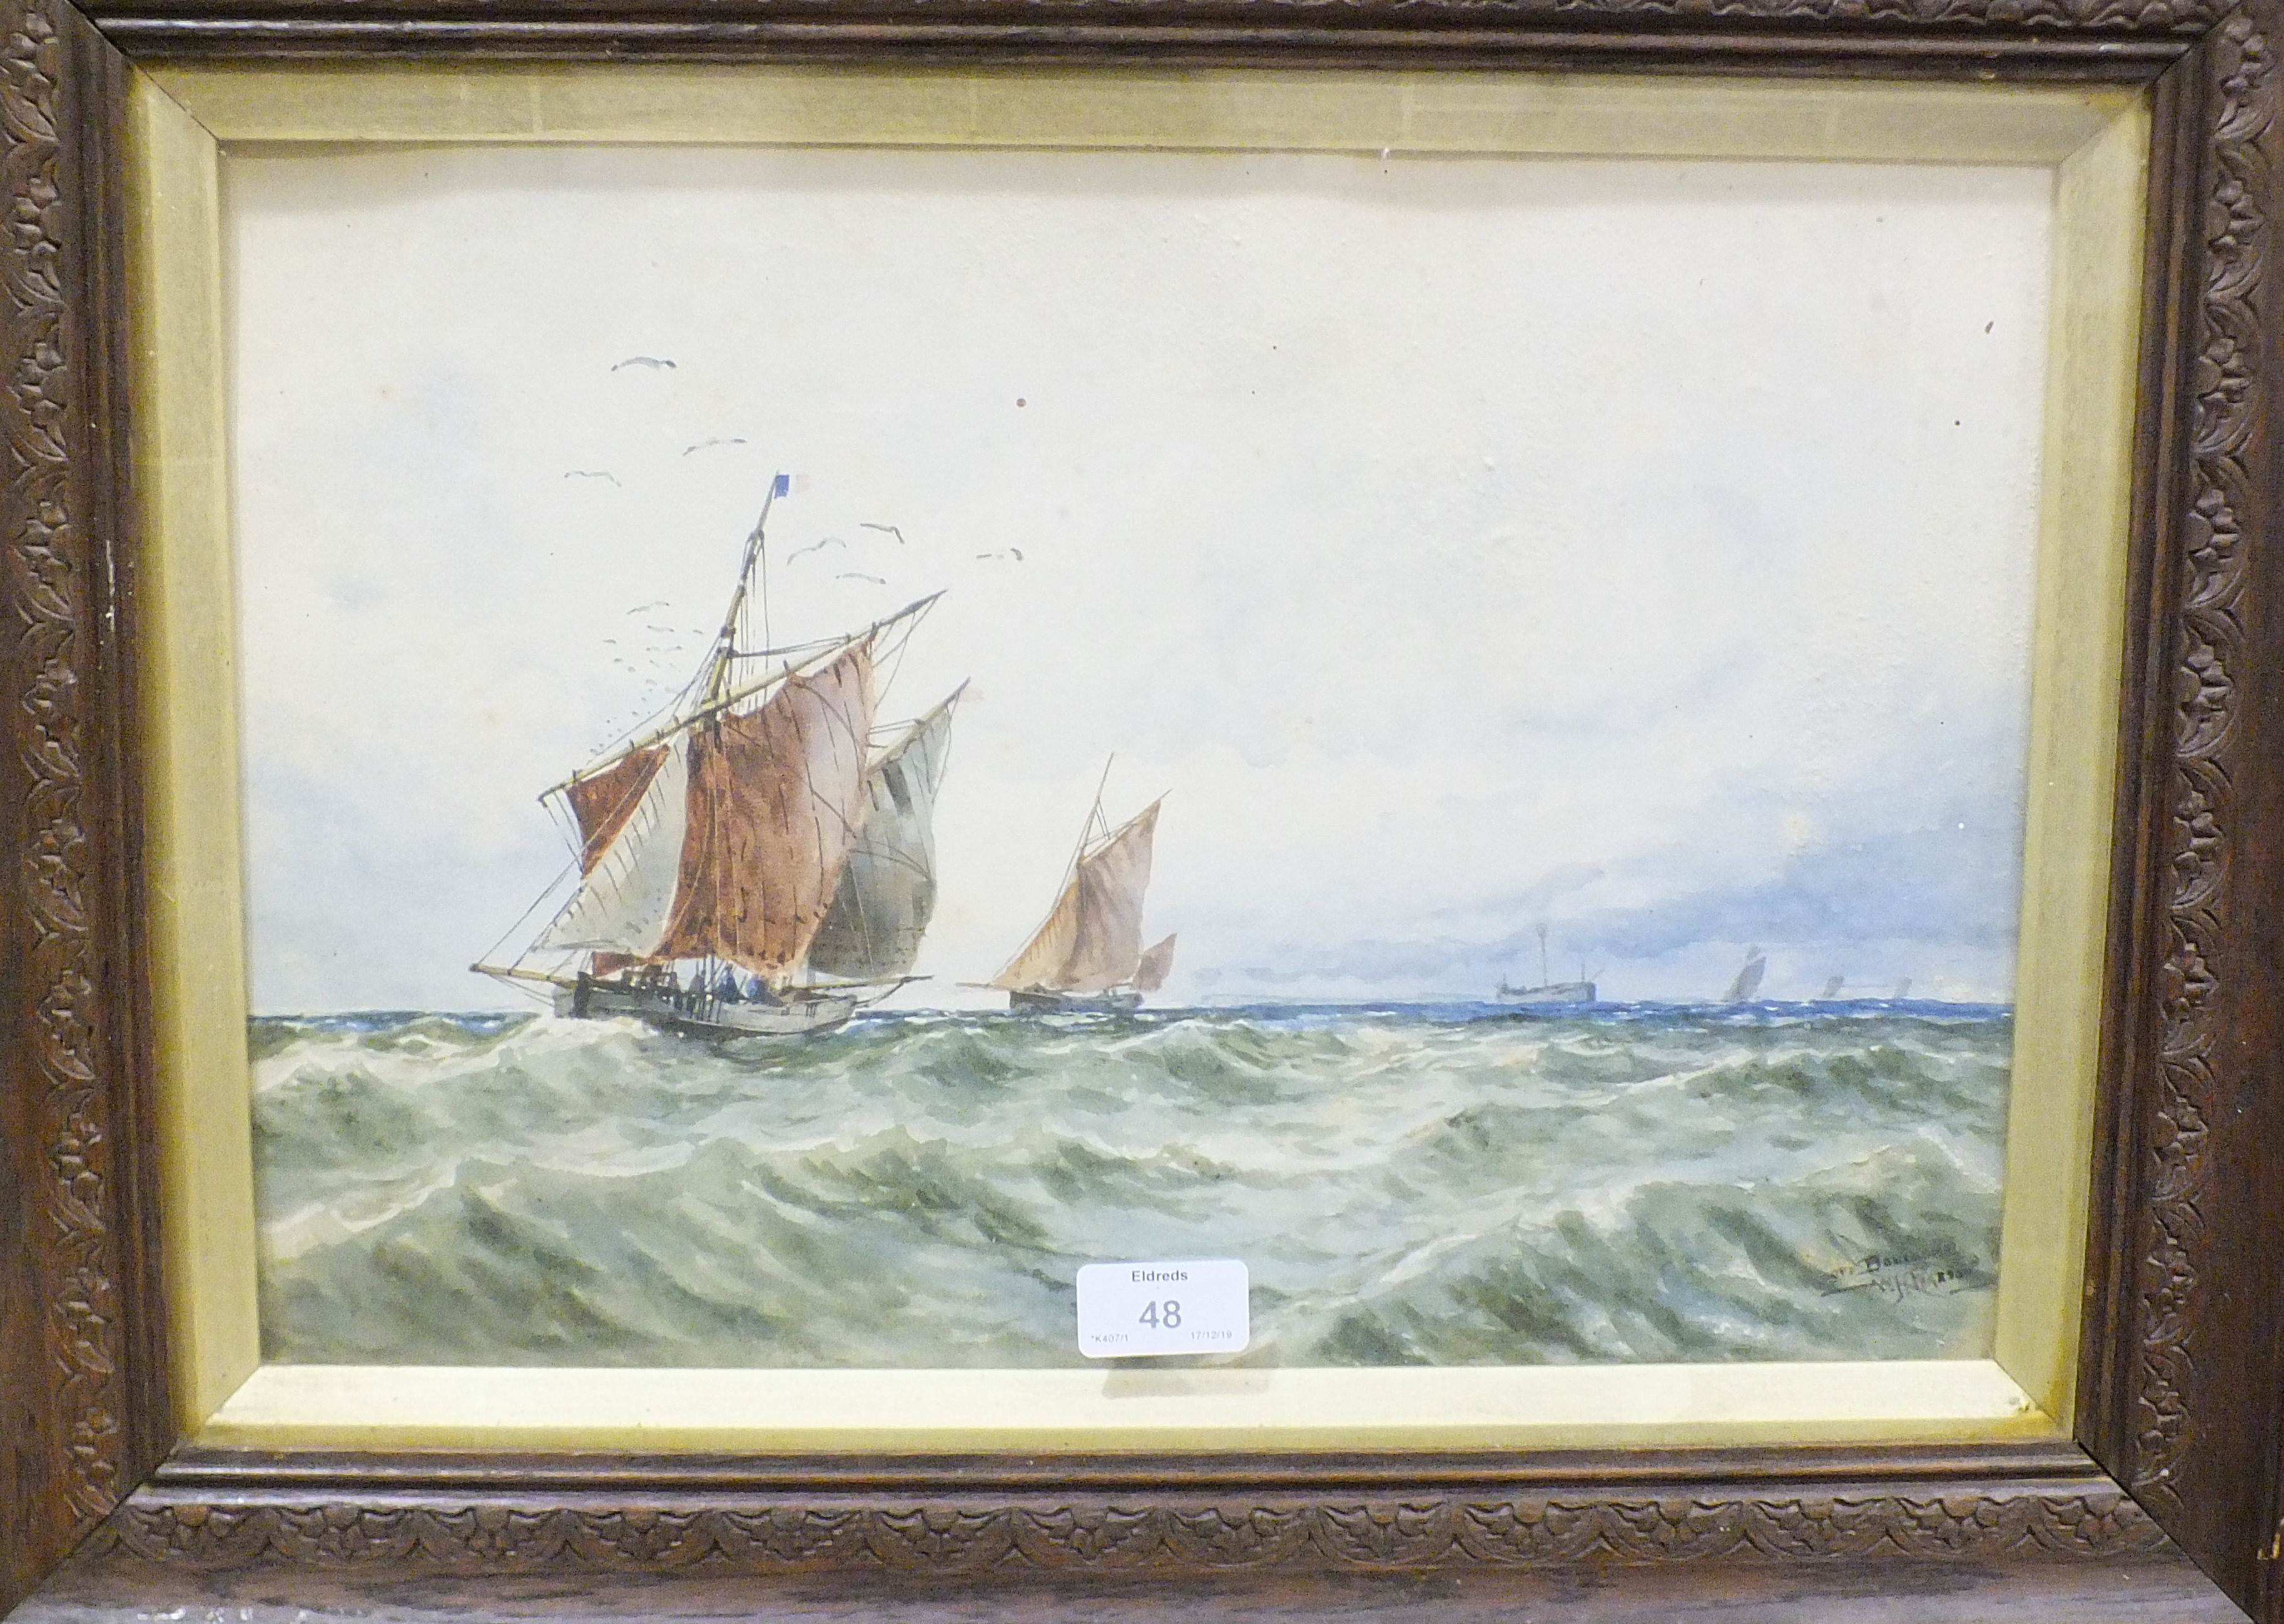 W H Pearson, 'Off Boulogne, fishing boats', signed watercolour, 26.5 x 39cm, D H Pinder 'Dixies